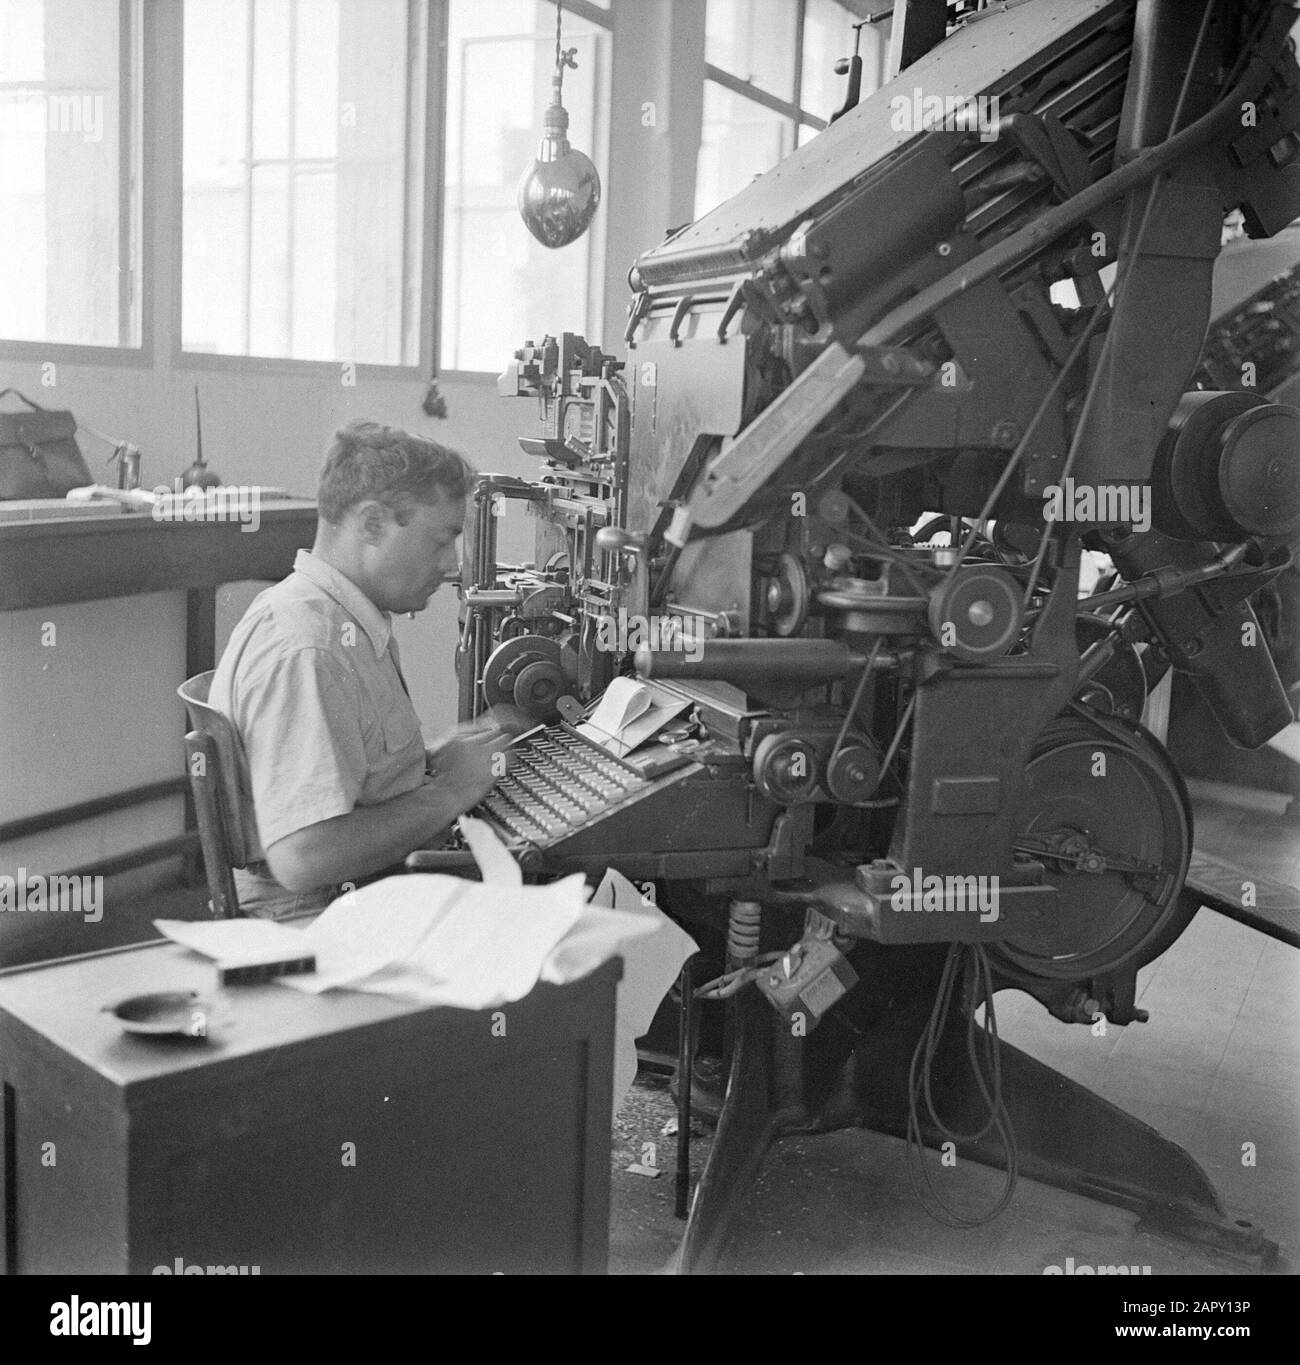 Israel 1948-1949: daily Dawar  Employee in the lynotype typesetting Date: Mon 1949 may 16 Location: Israel, Tel Aviv Keywords: printing, graphic arts, newspapers, machines, media, press Stock Photo